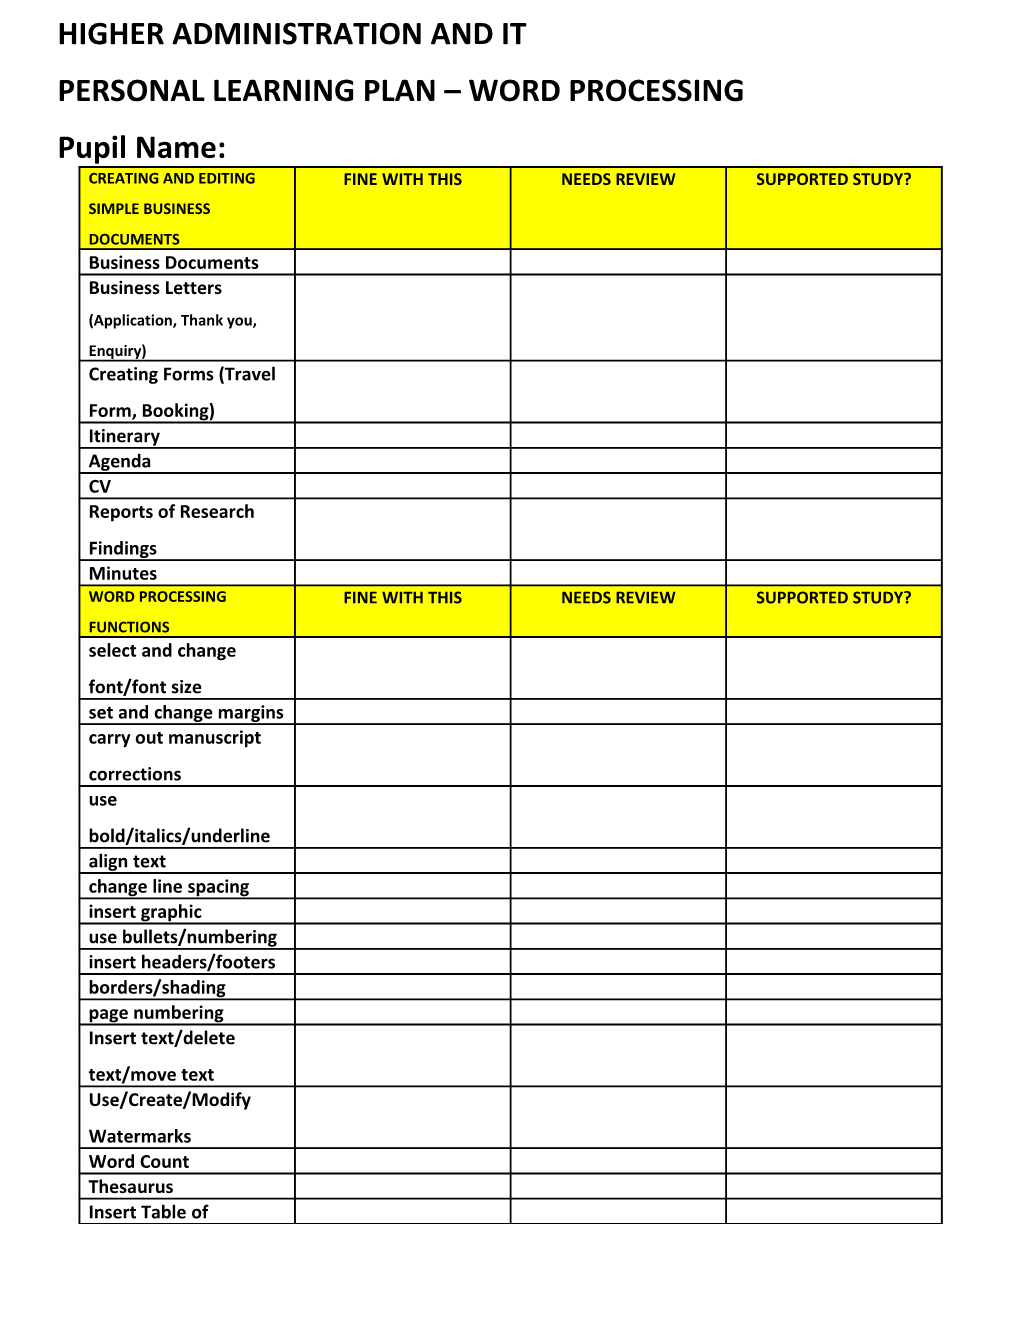 Personal Learning Plan Word Processing